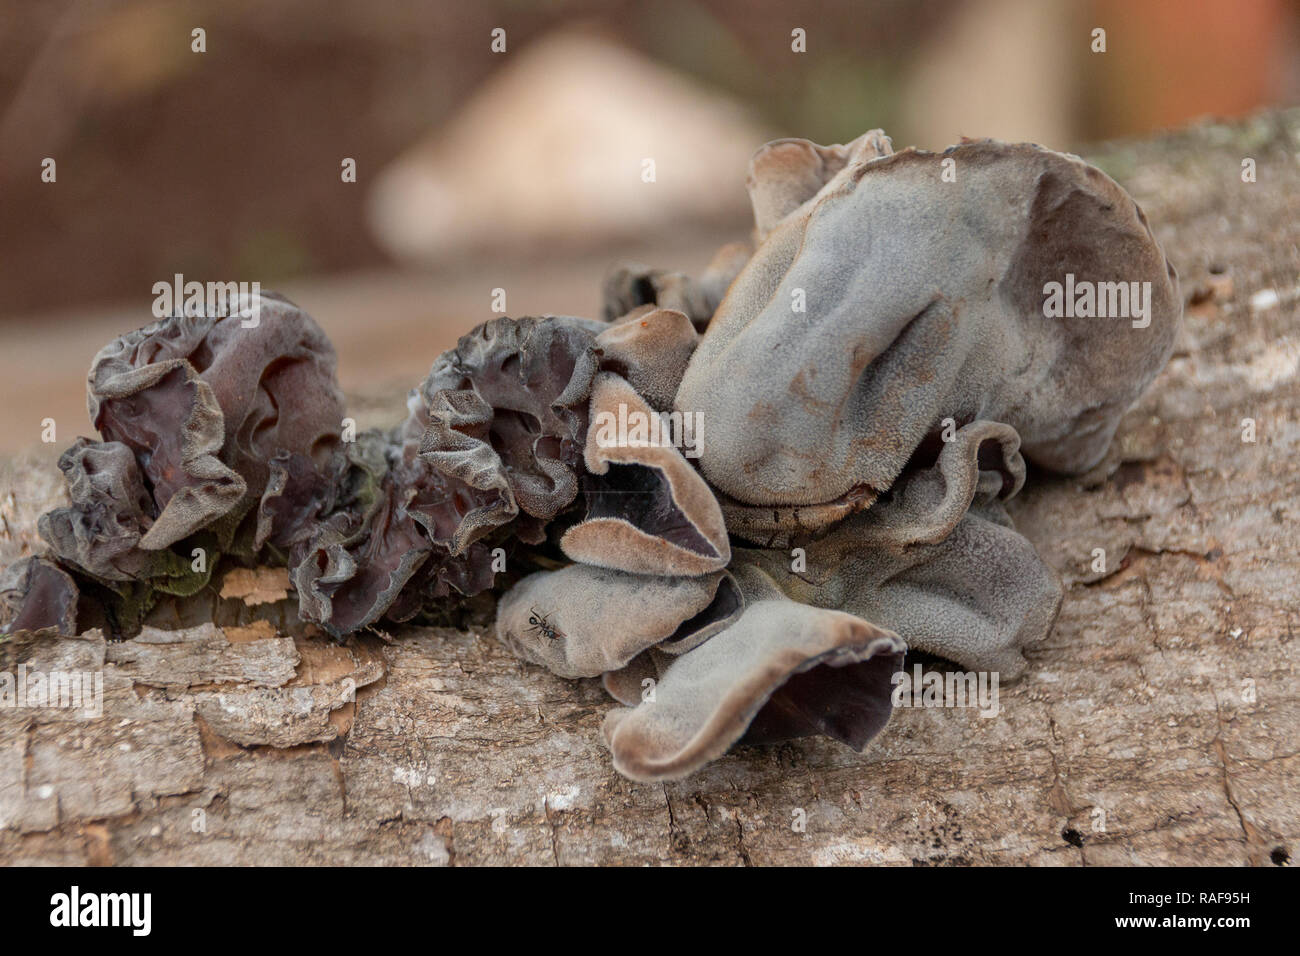 A close up front view of fungus growing on the side of a tree stump in the garden Stock Photo